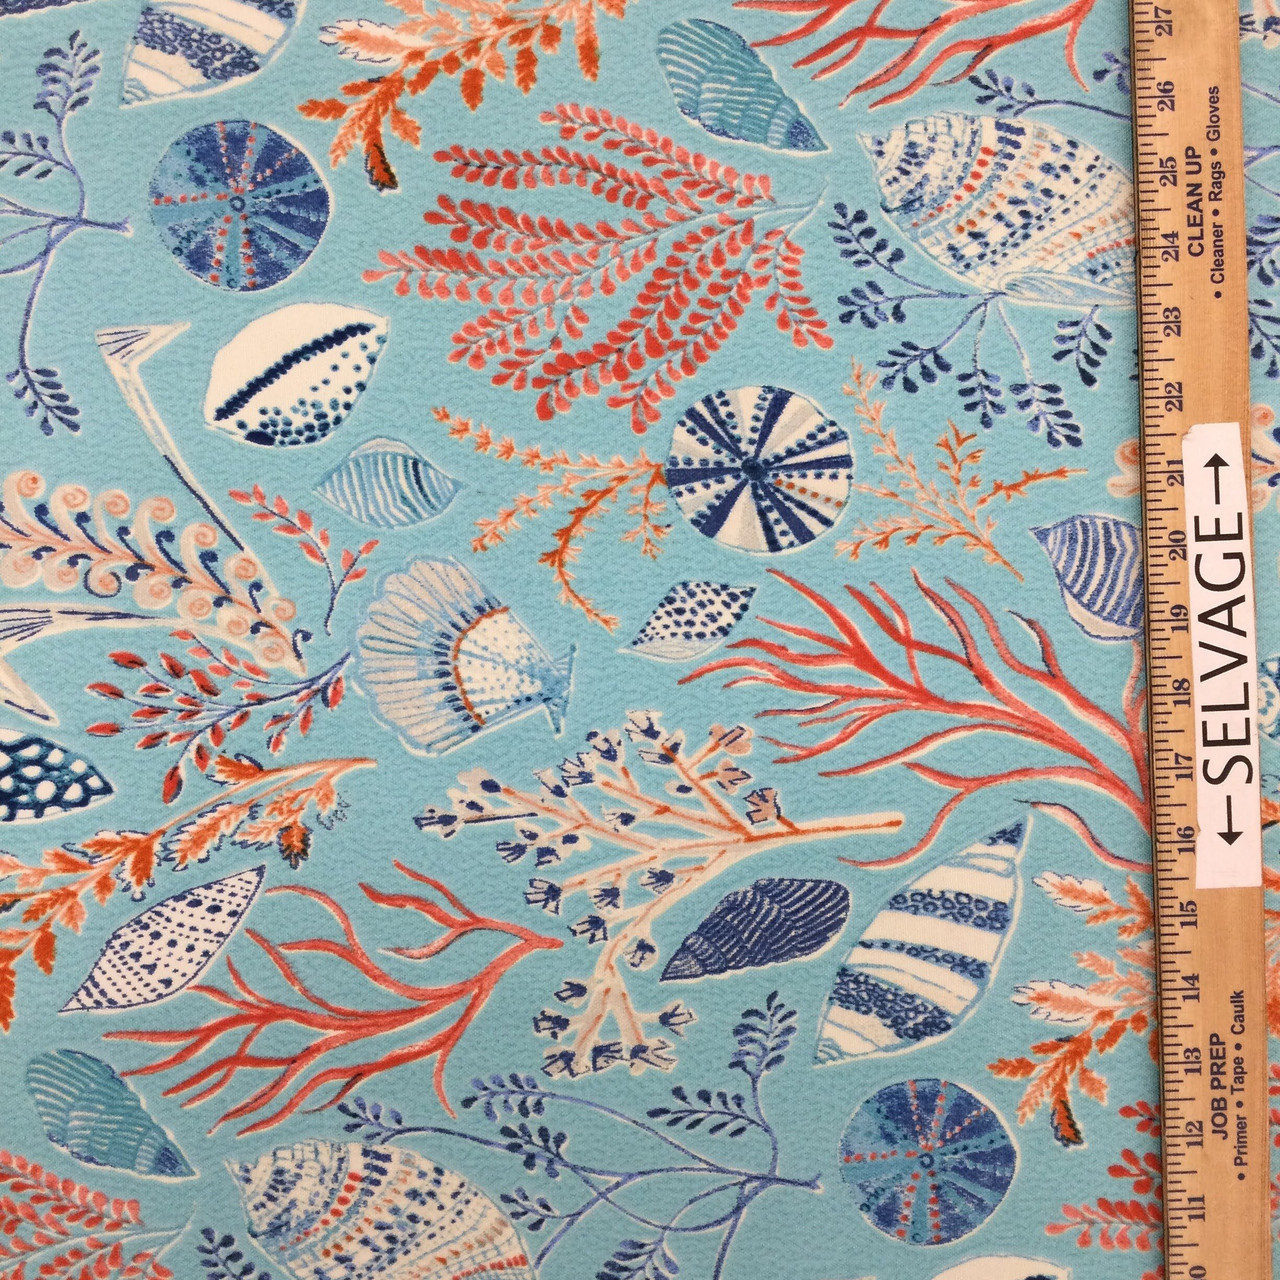 Sea Shells and Coral in Blue / Orange / Red, OUTDOOR Home Decor Fabric, Upholstery, 54 Wide, By the Yard